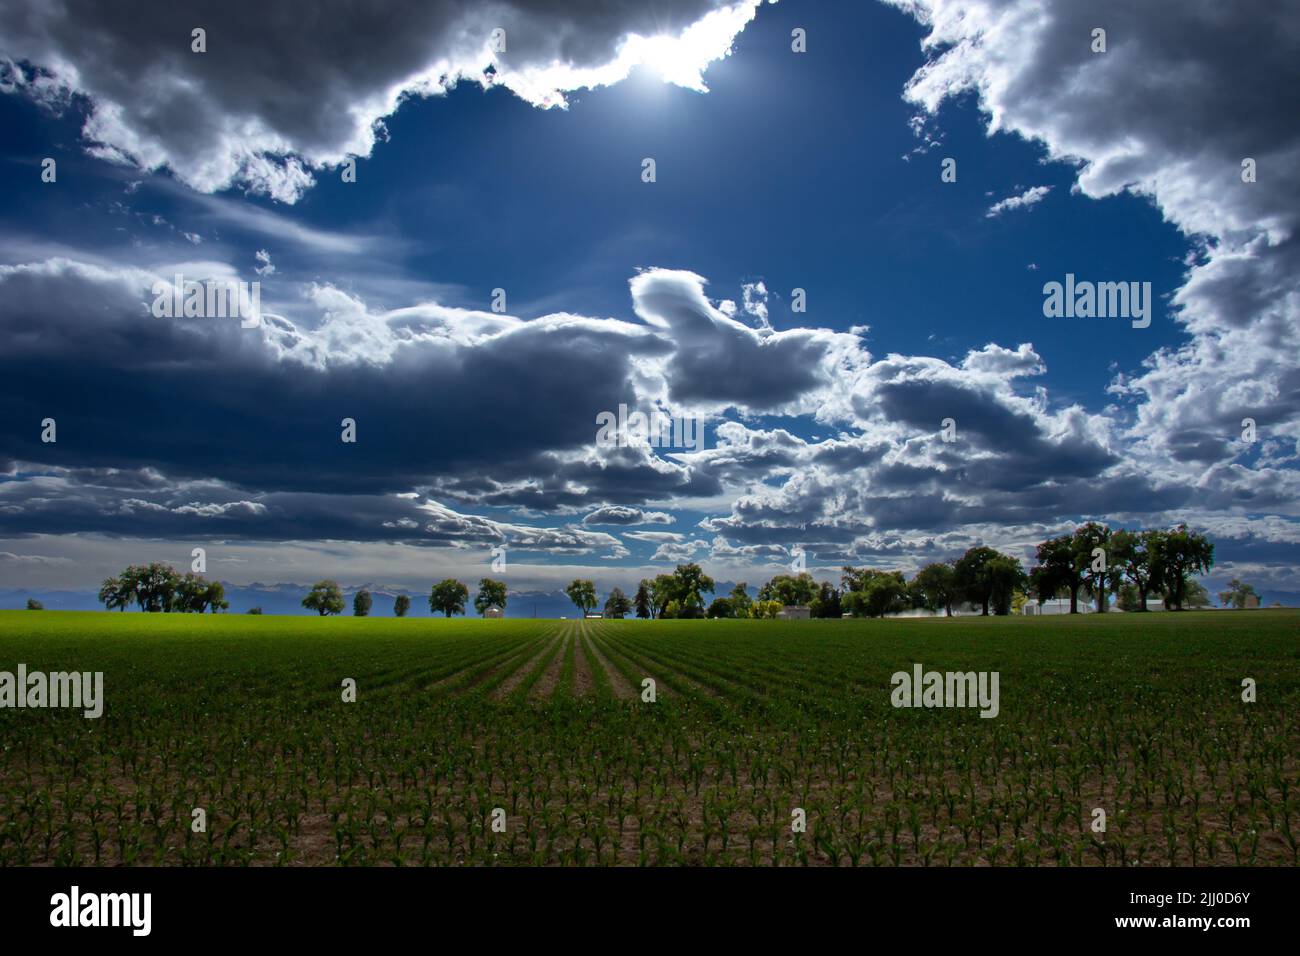 Patterns in agriculture Stock Photo